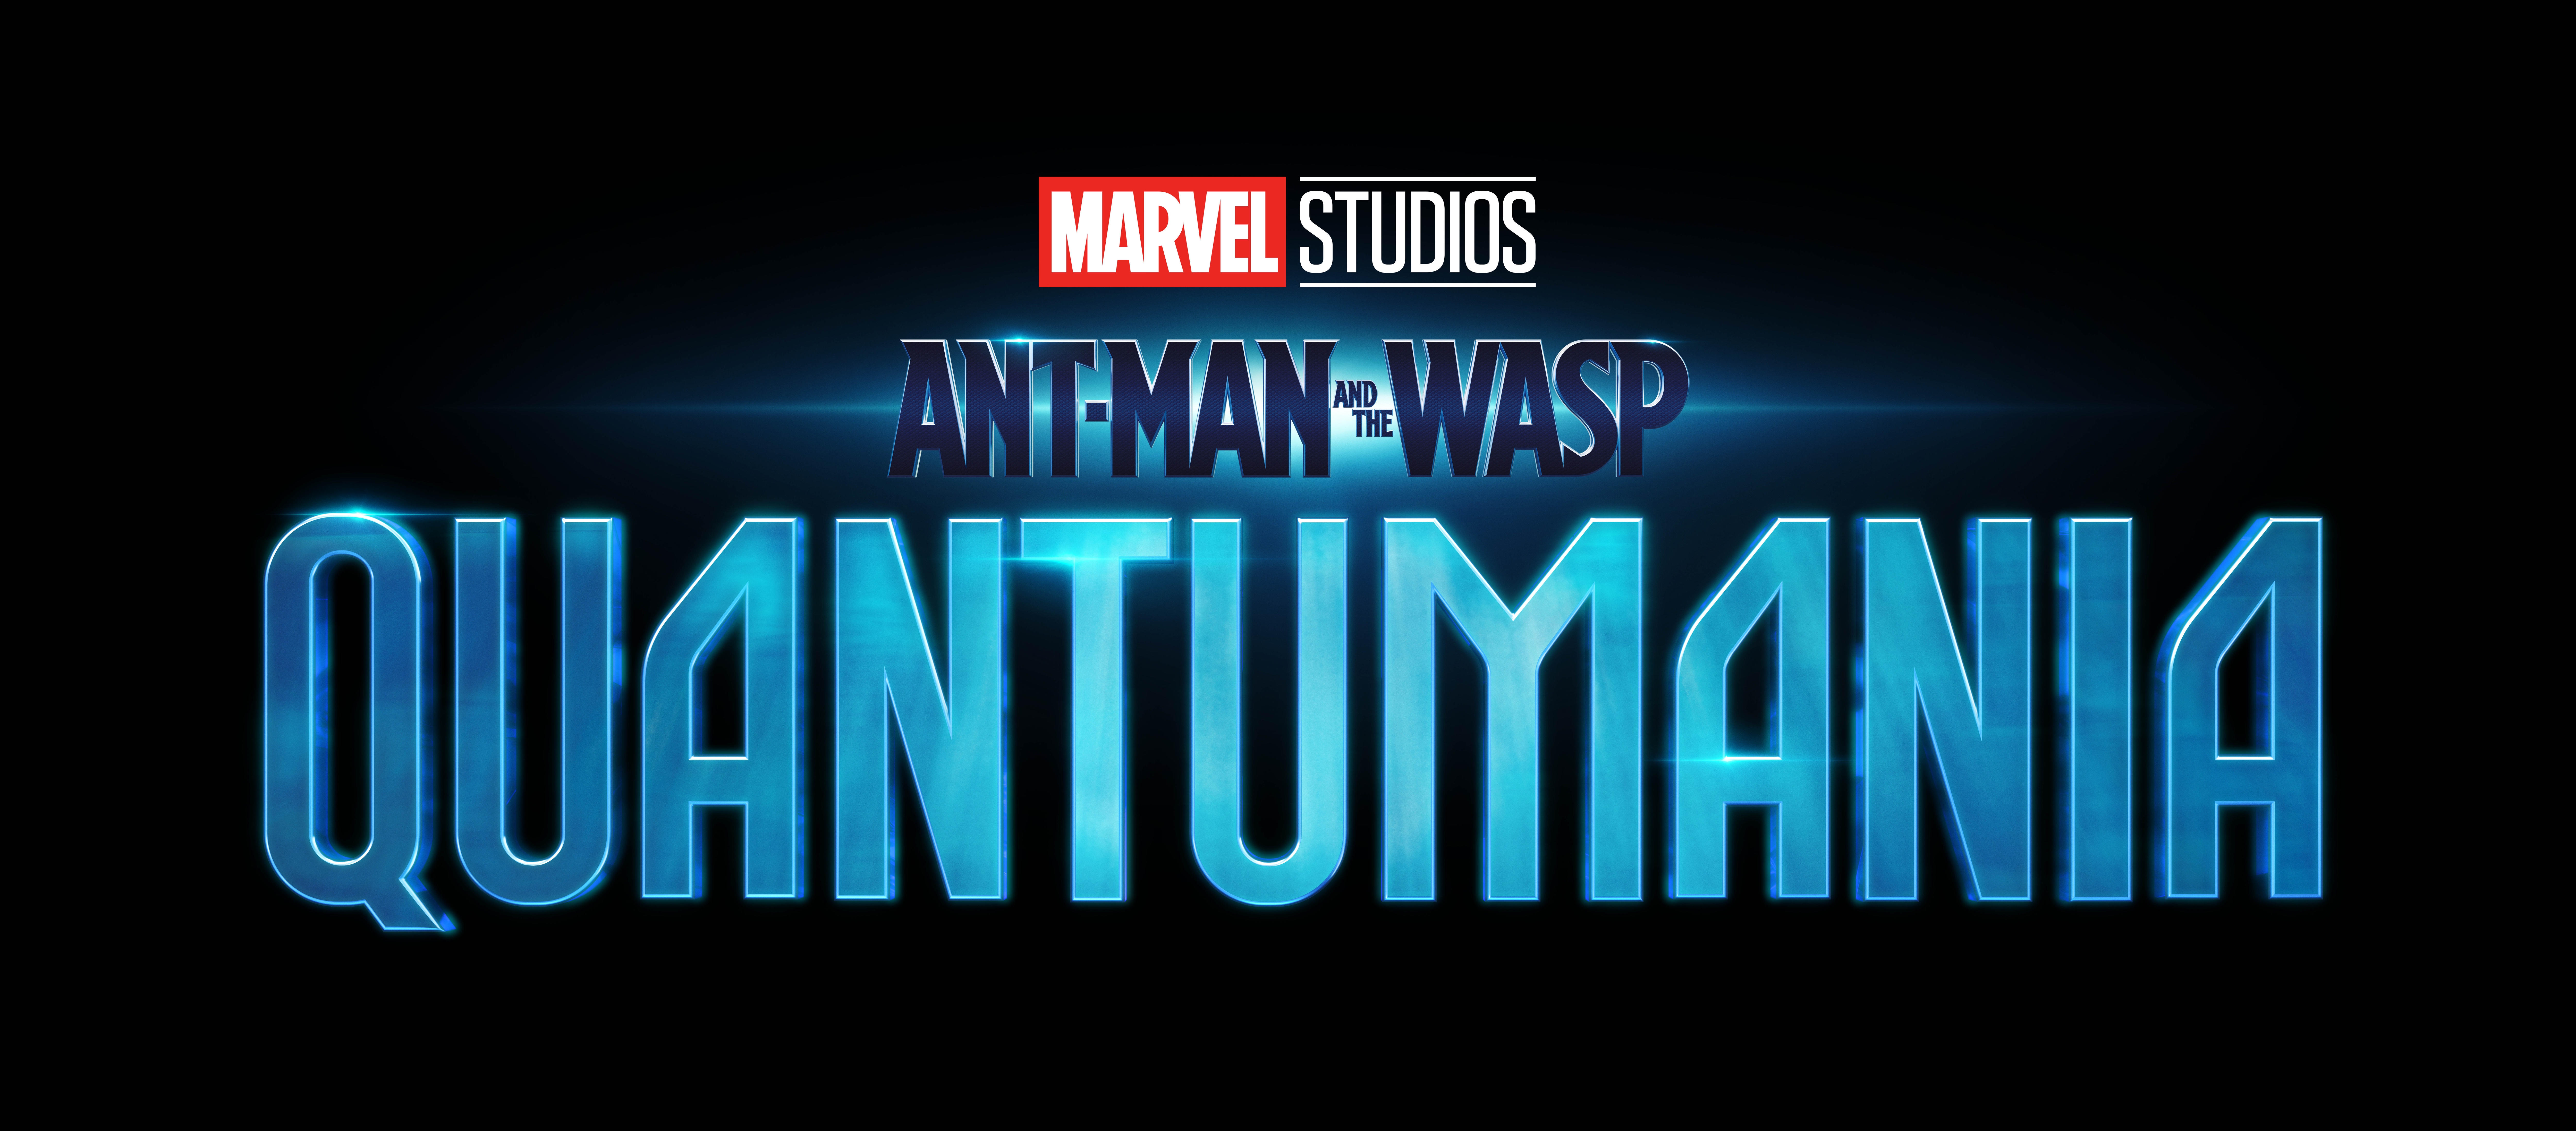 Exclusive Clip from Marvel Studios’ Ant-Man and the Wasp: Quantumania Introduces Lord Kryler